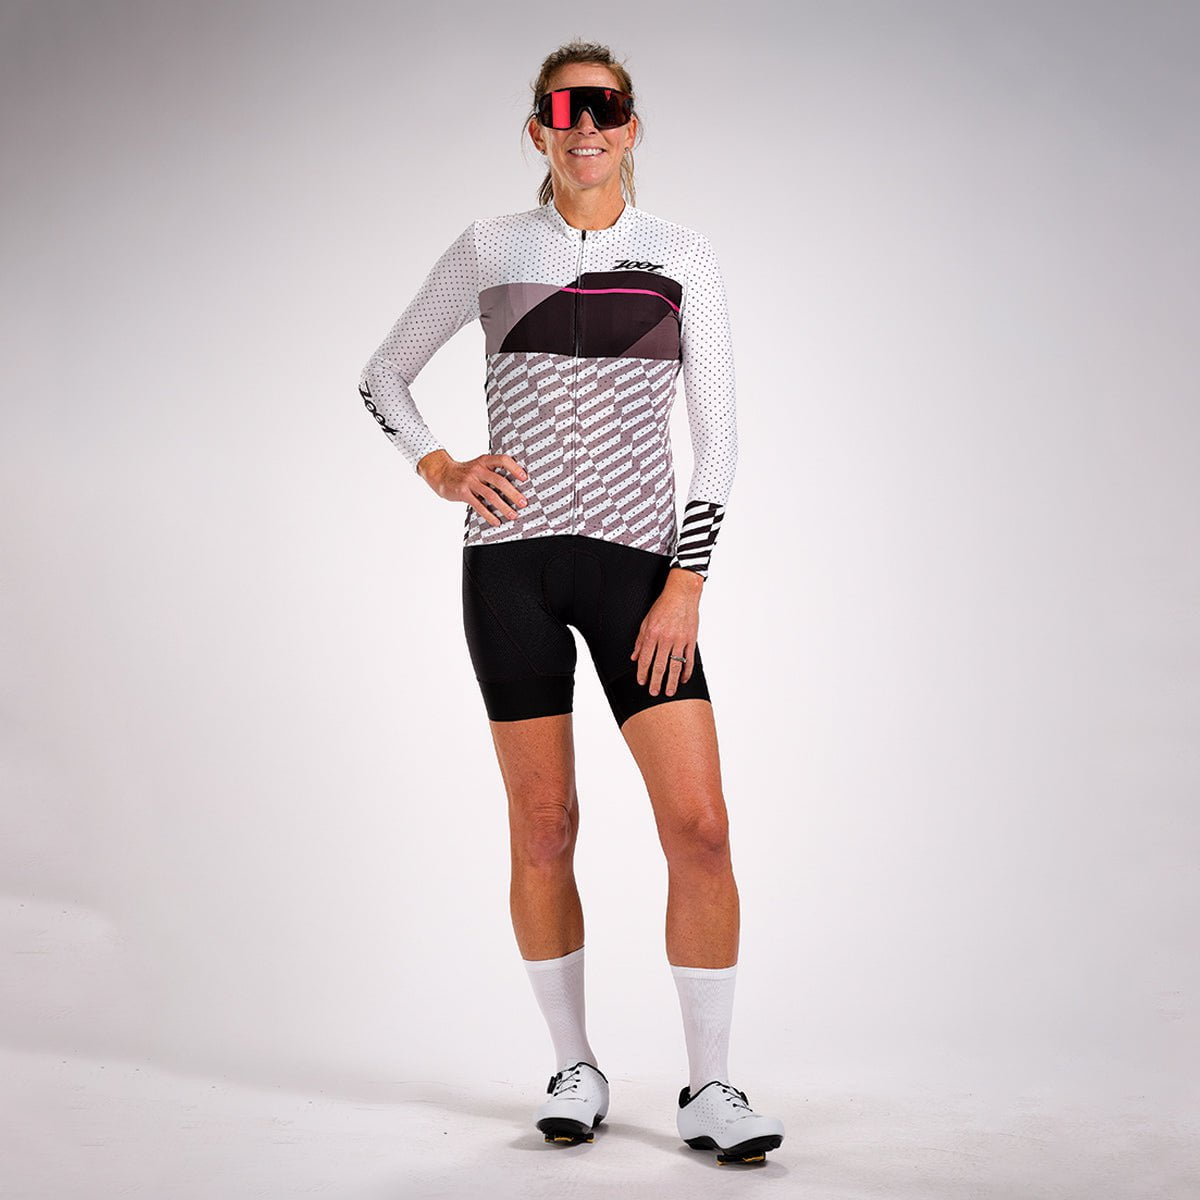 Zoot Sports CYCLE TOPS WOMENS LTD CYCLE SUN STOP LS JERSEY - WHITE